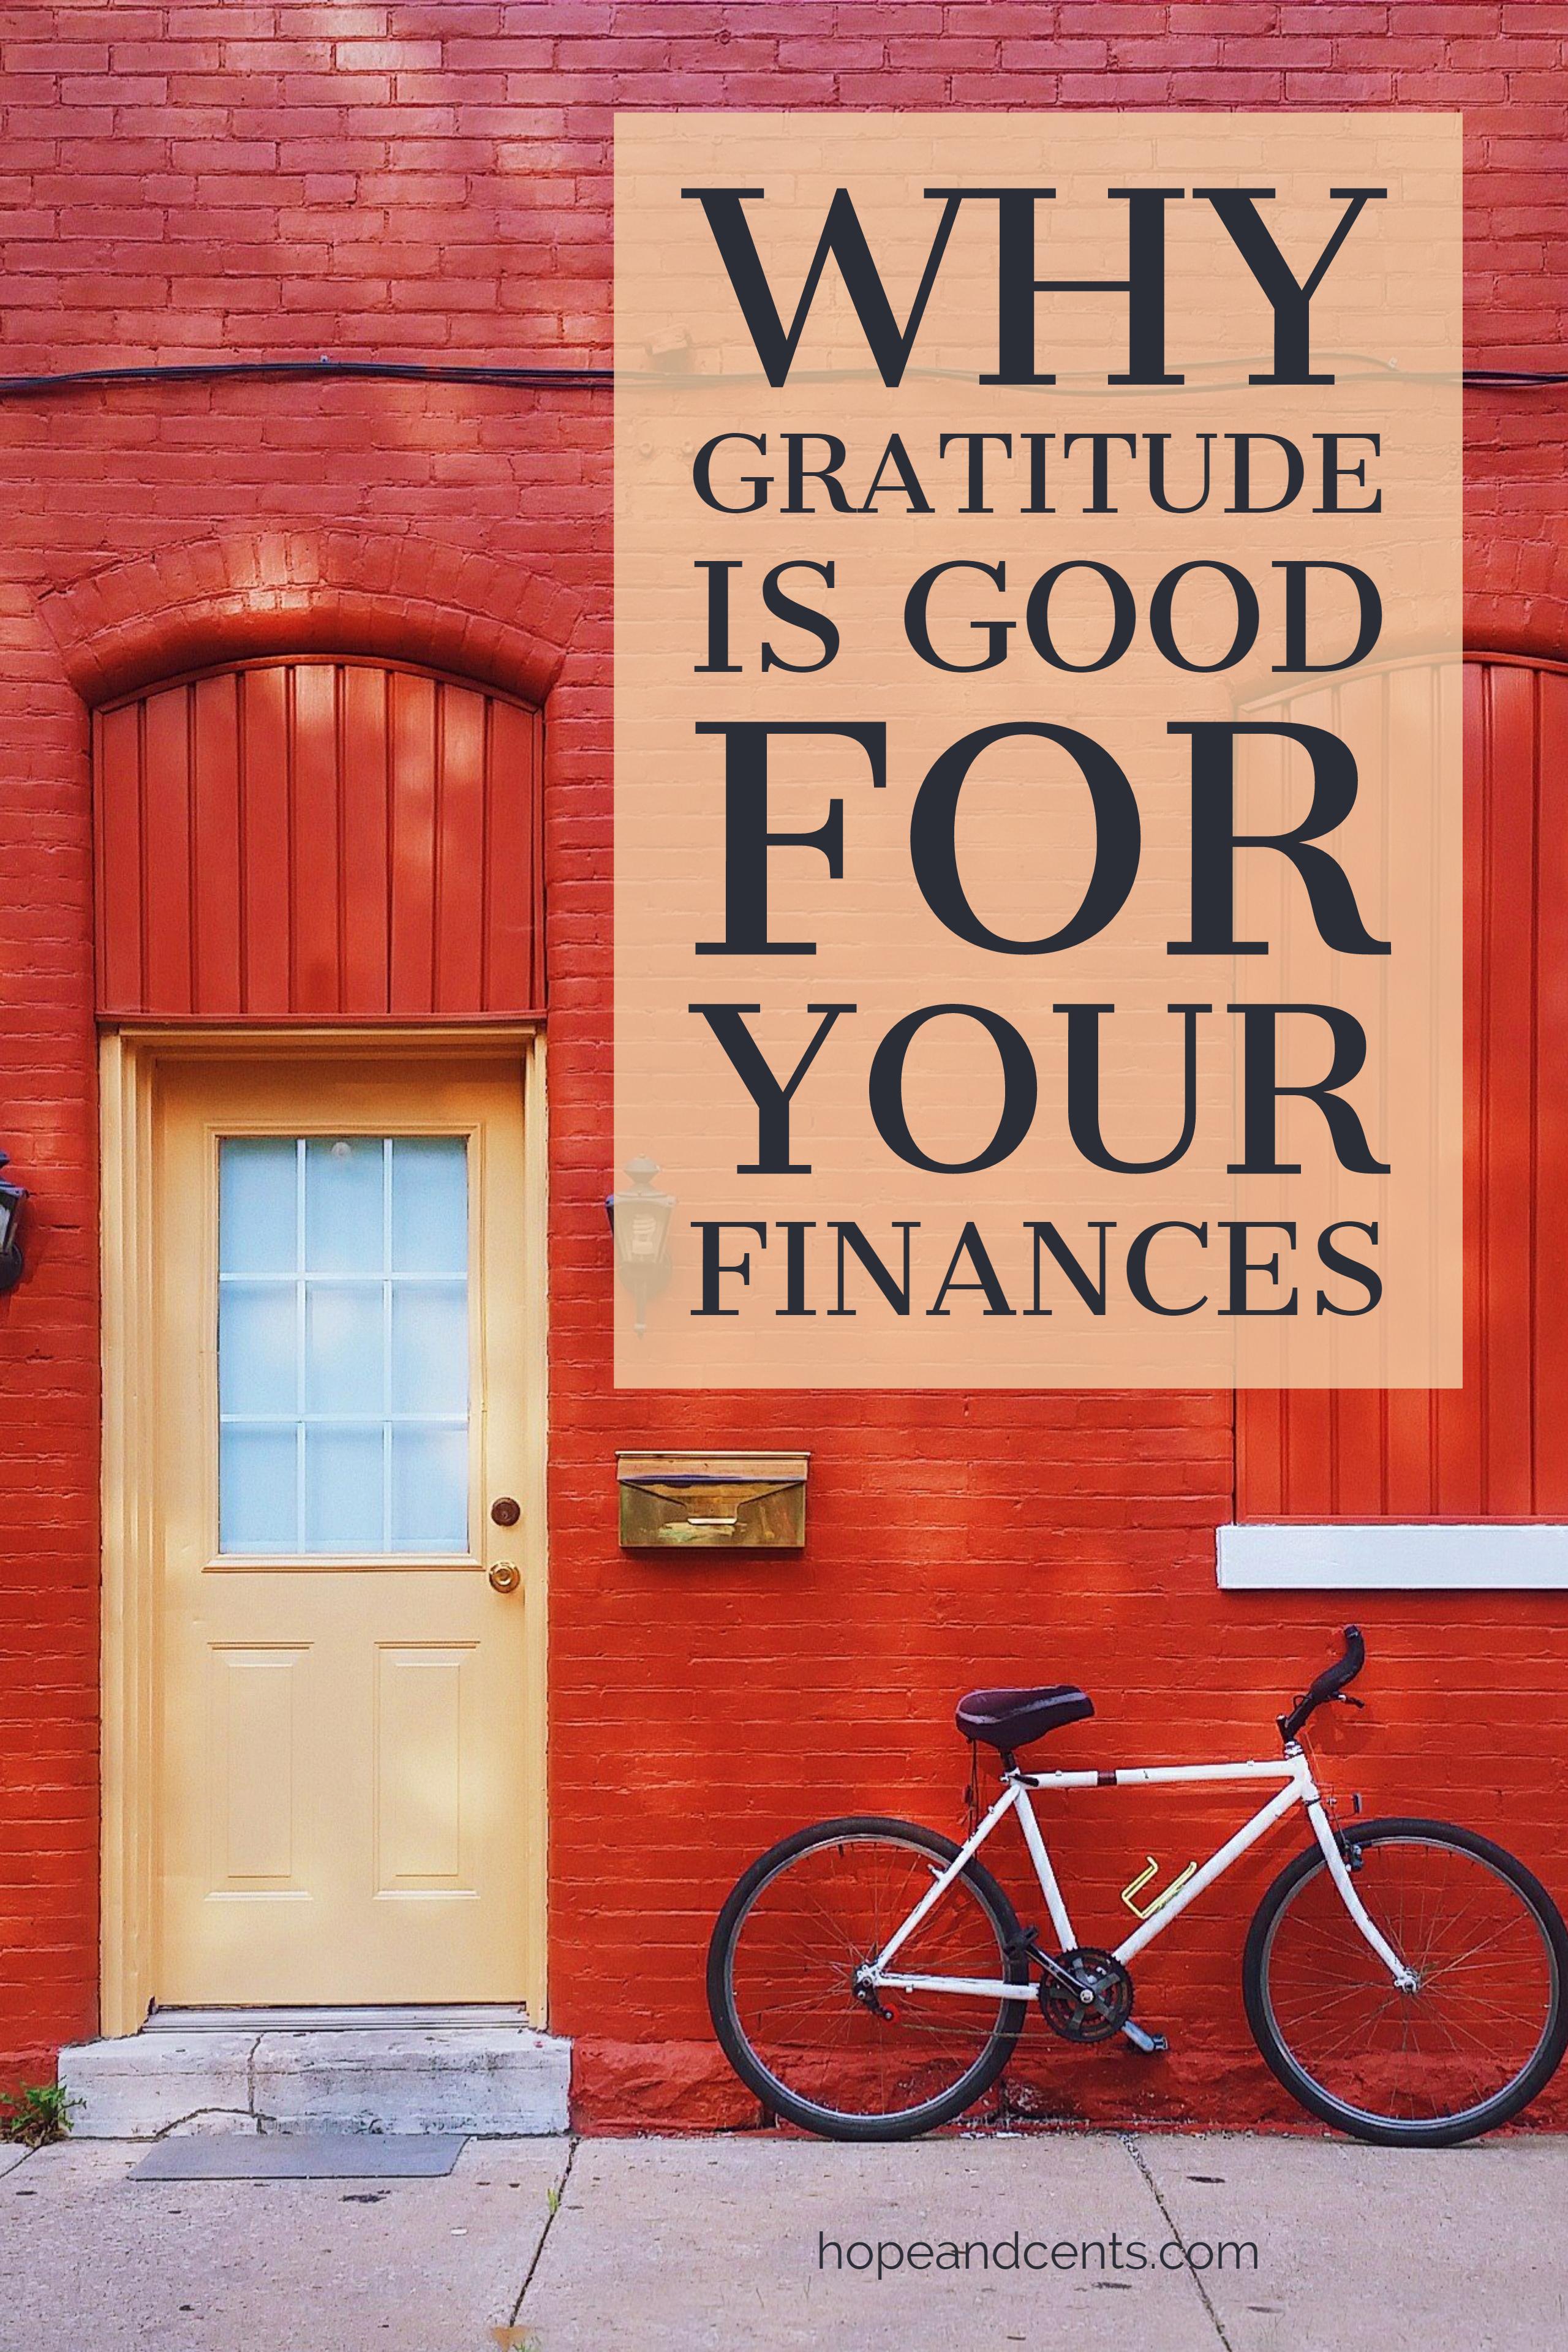 Why Gratitude is Good For Your Finances